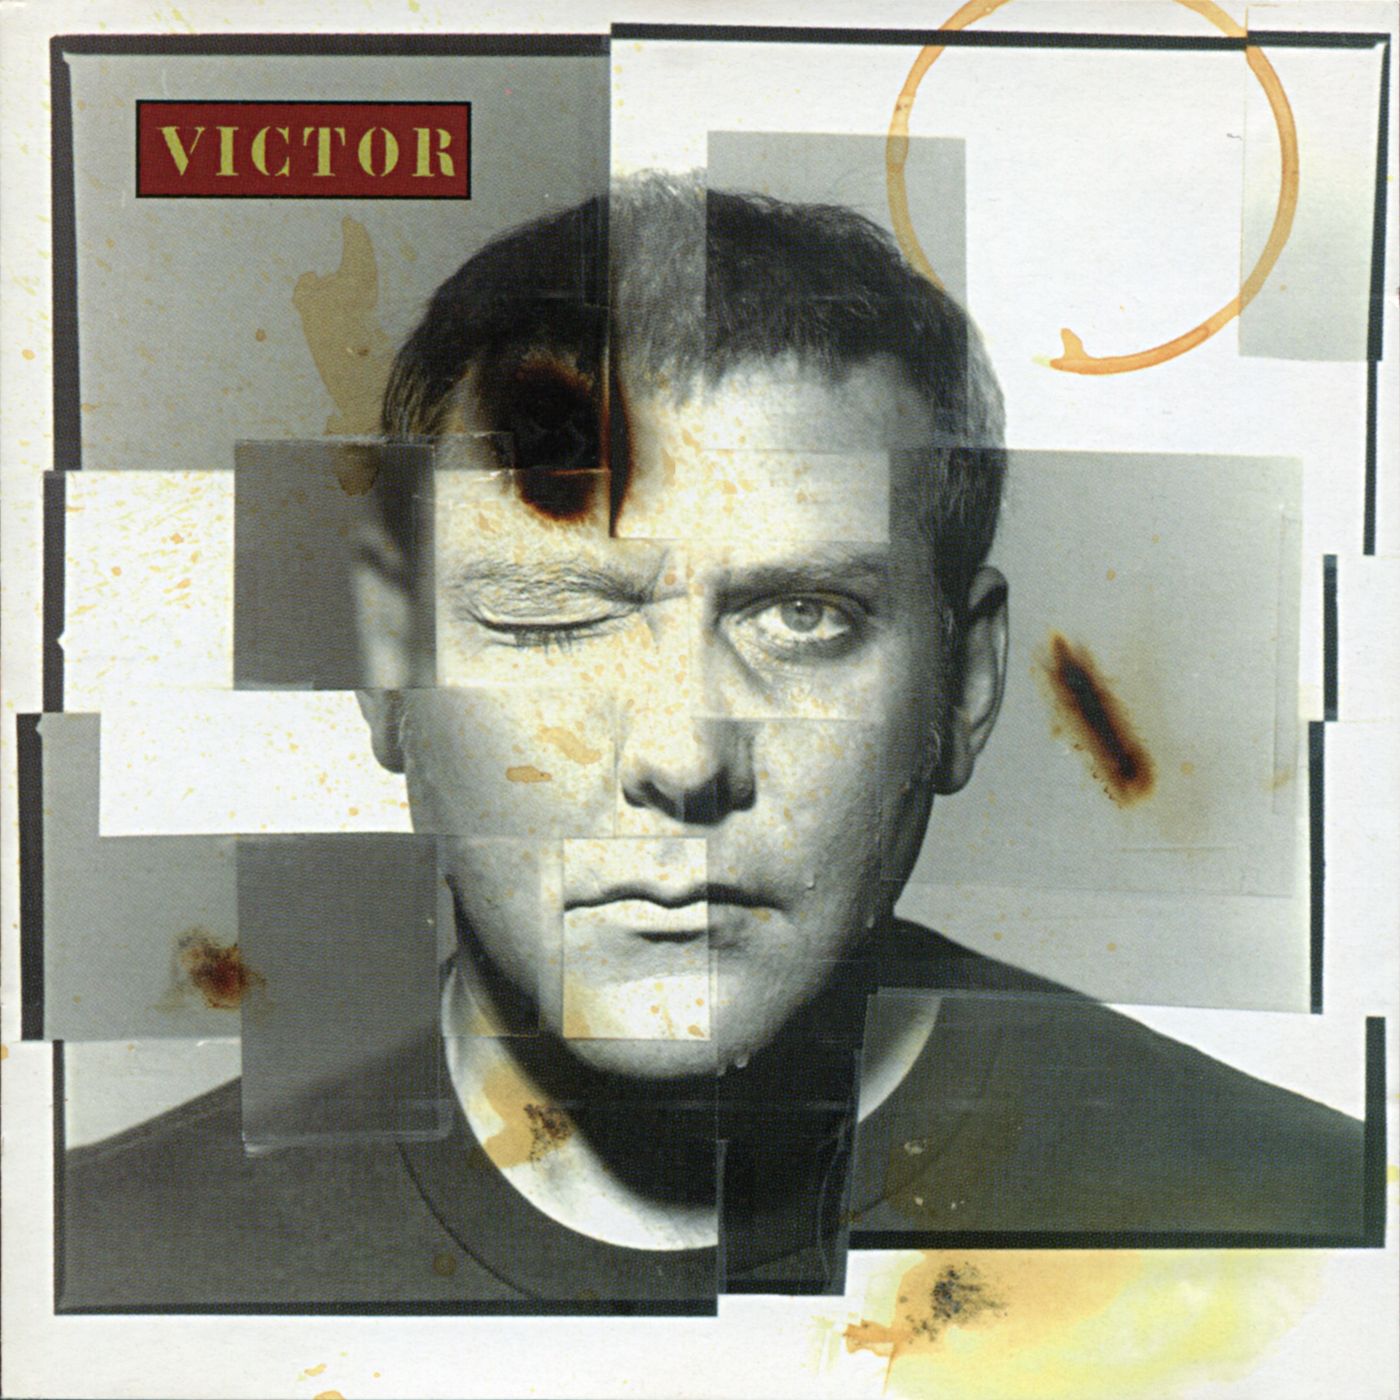 VICTOR cover art